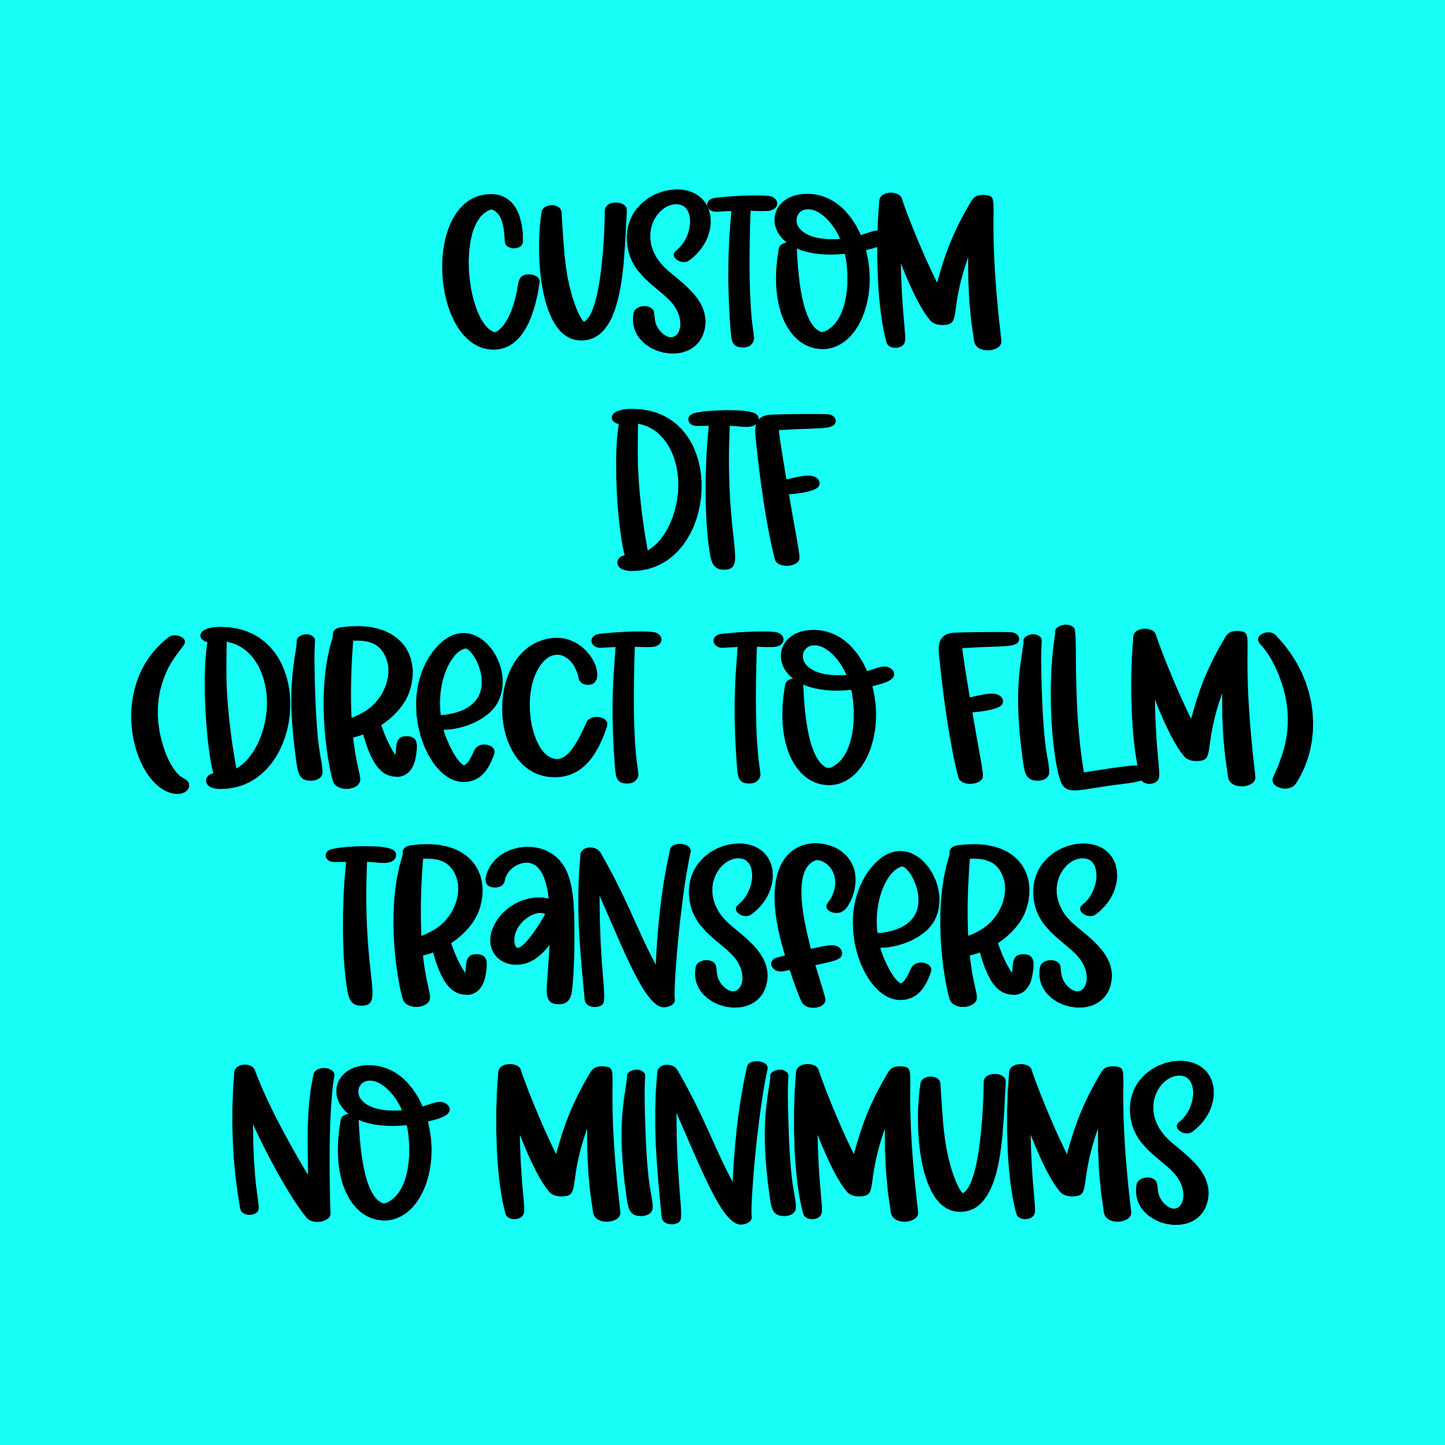 CUSTOM Direct to Film (DTF) Transfer 7-10 Business Days From Artwork Approval